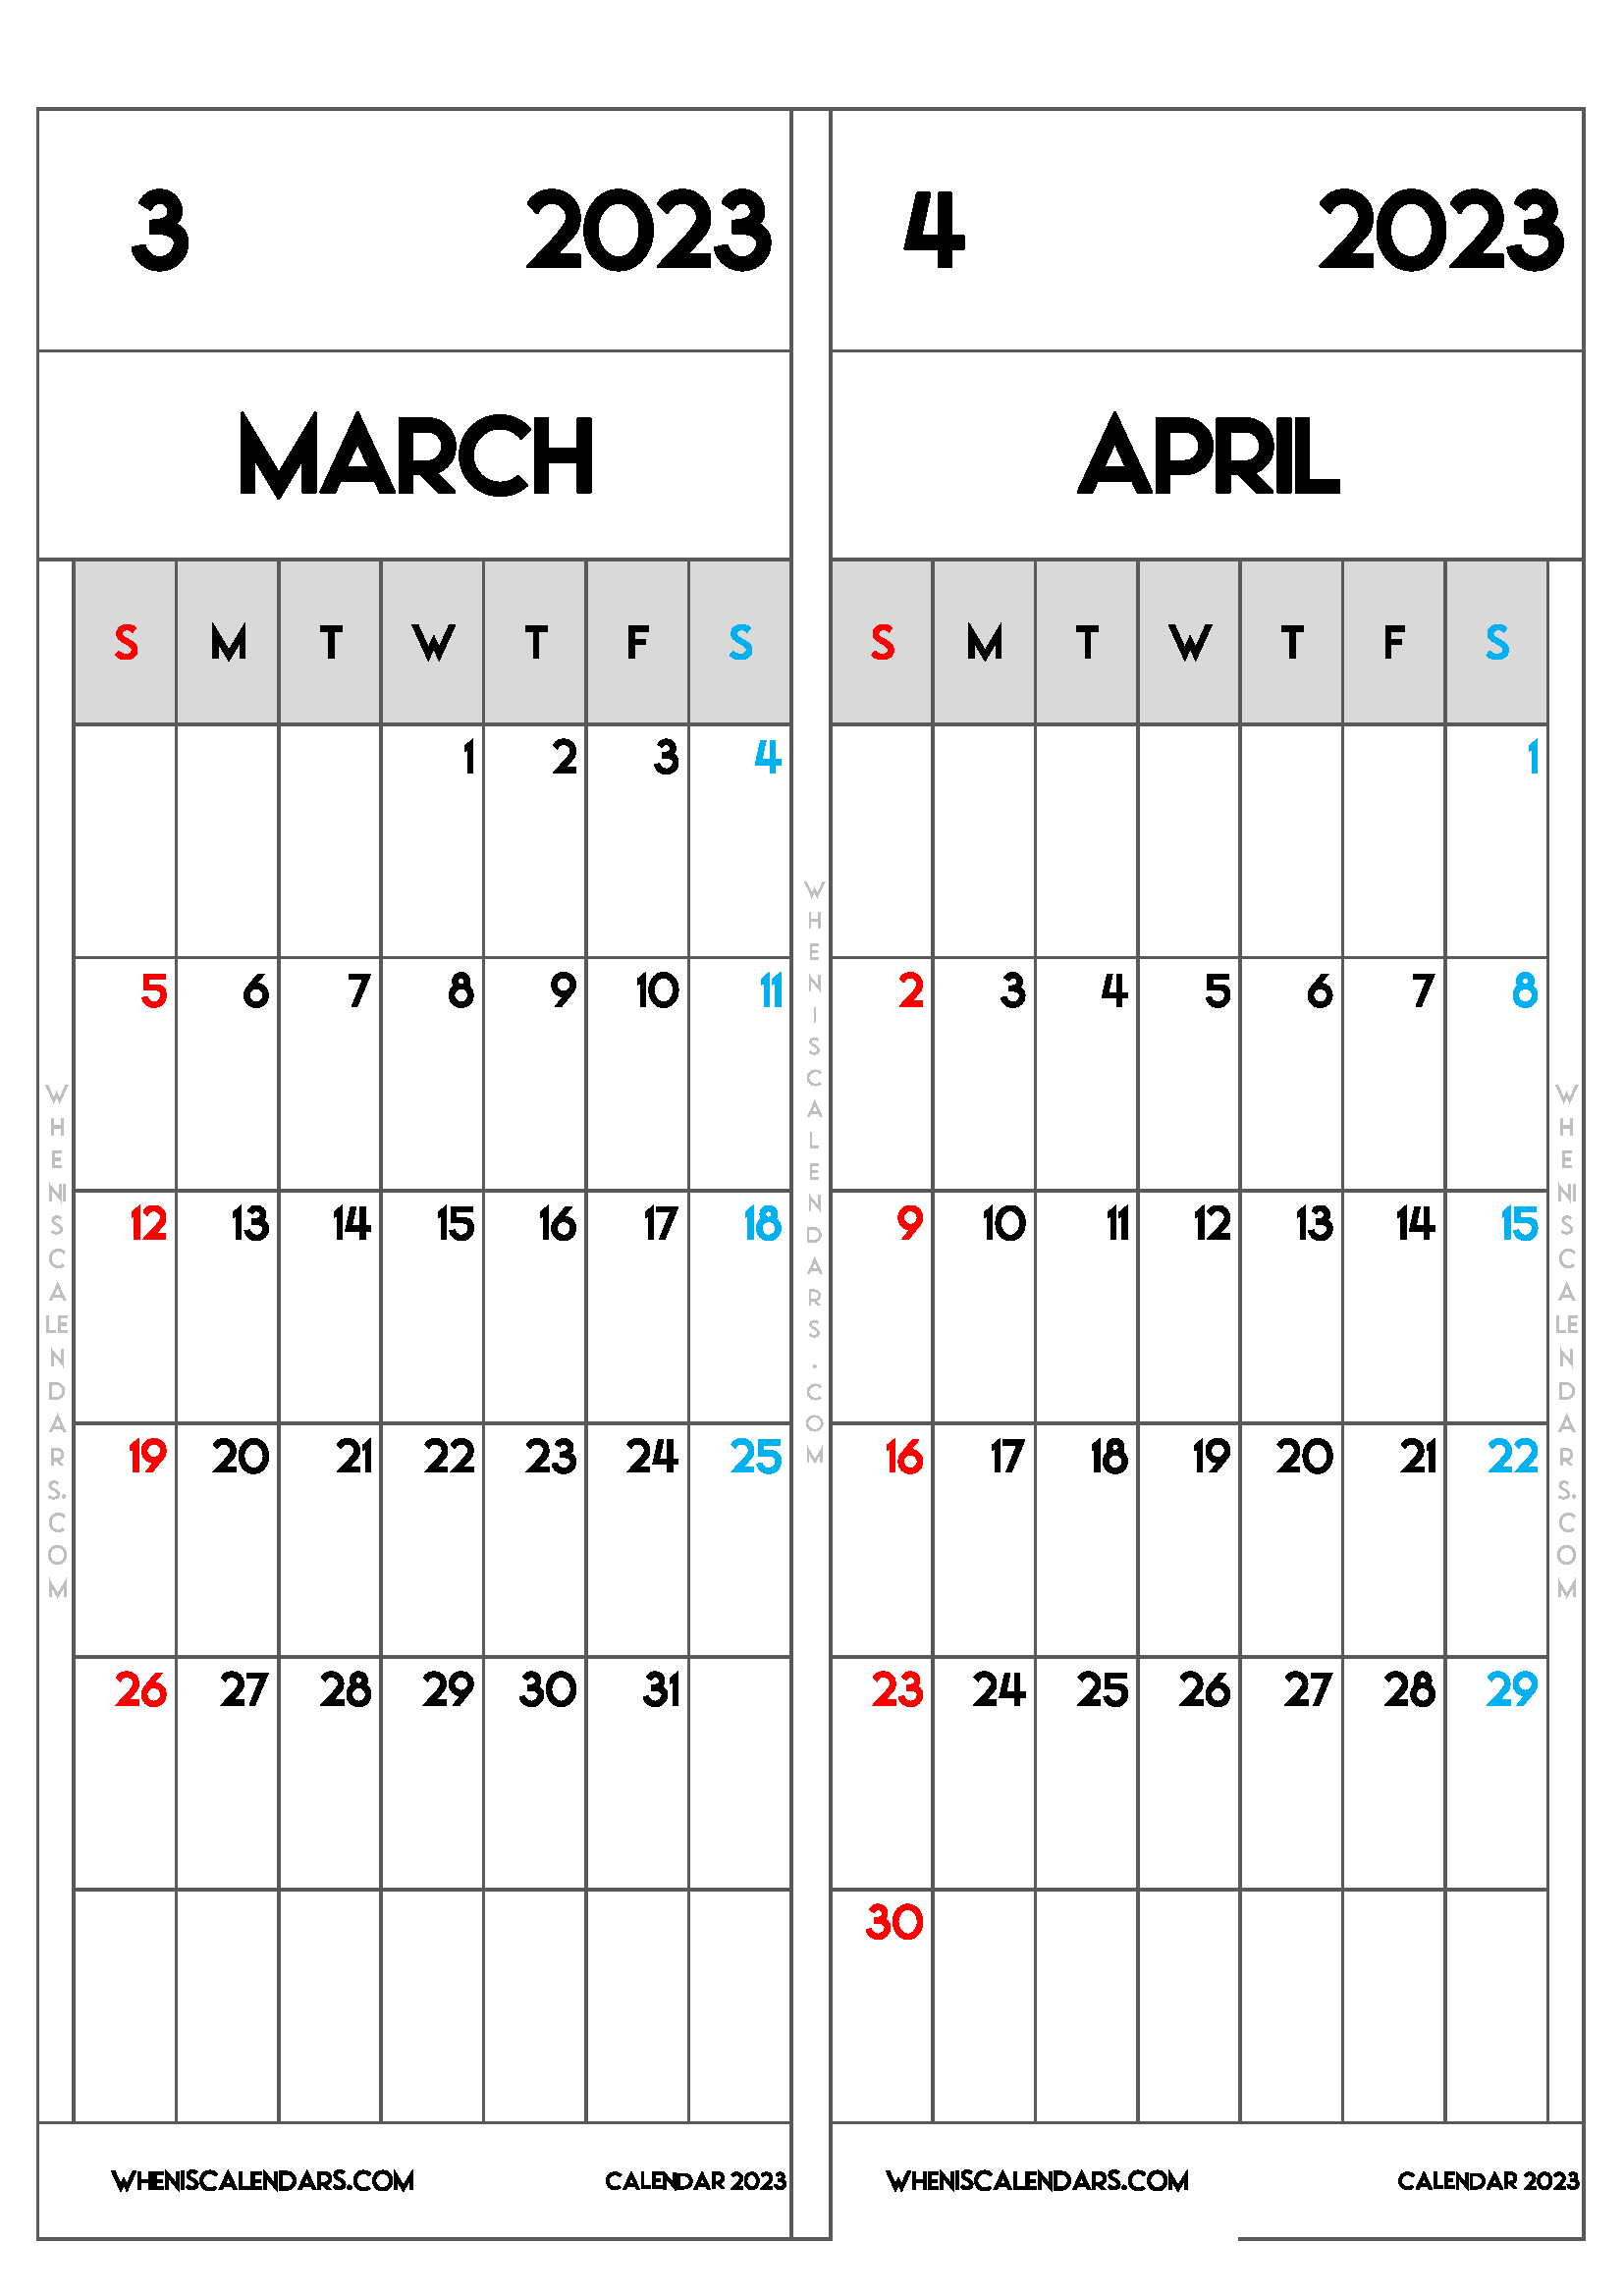 Download Free March April 2023 Printable Calendar Two Month per Page as PDF and PNG